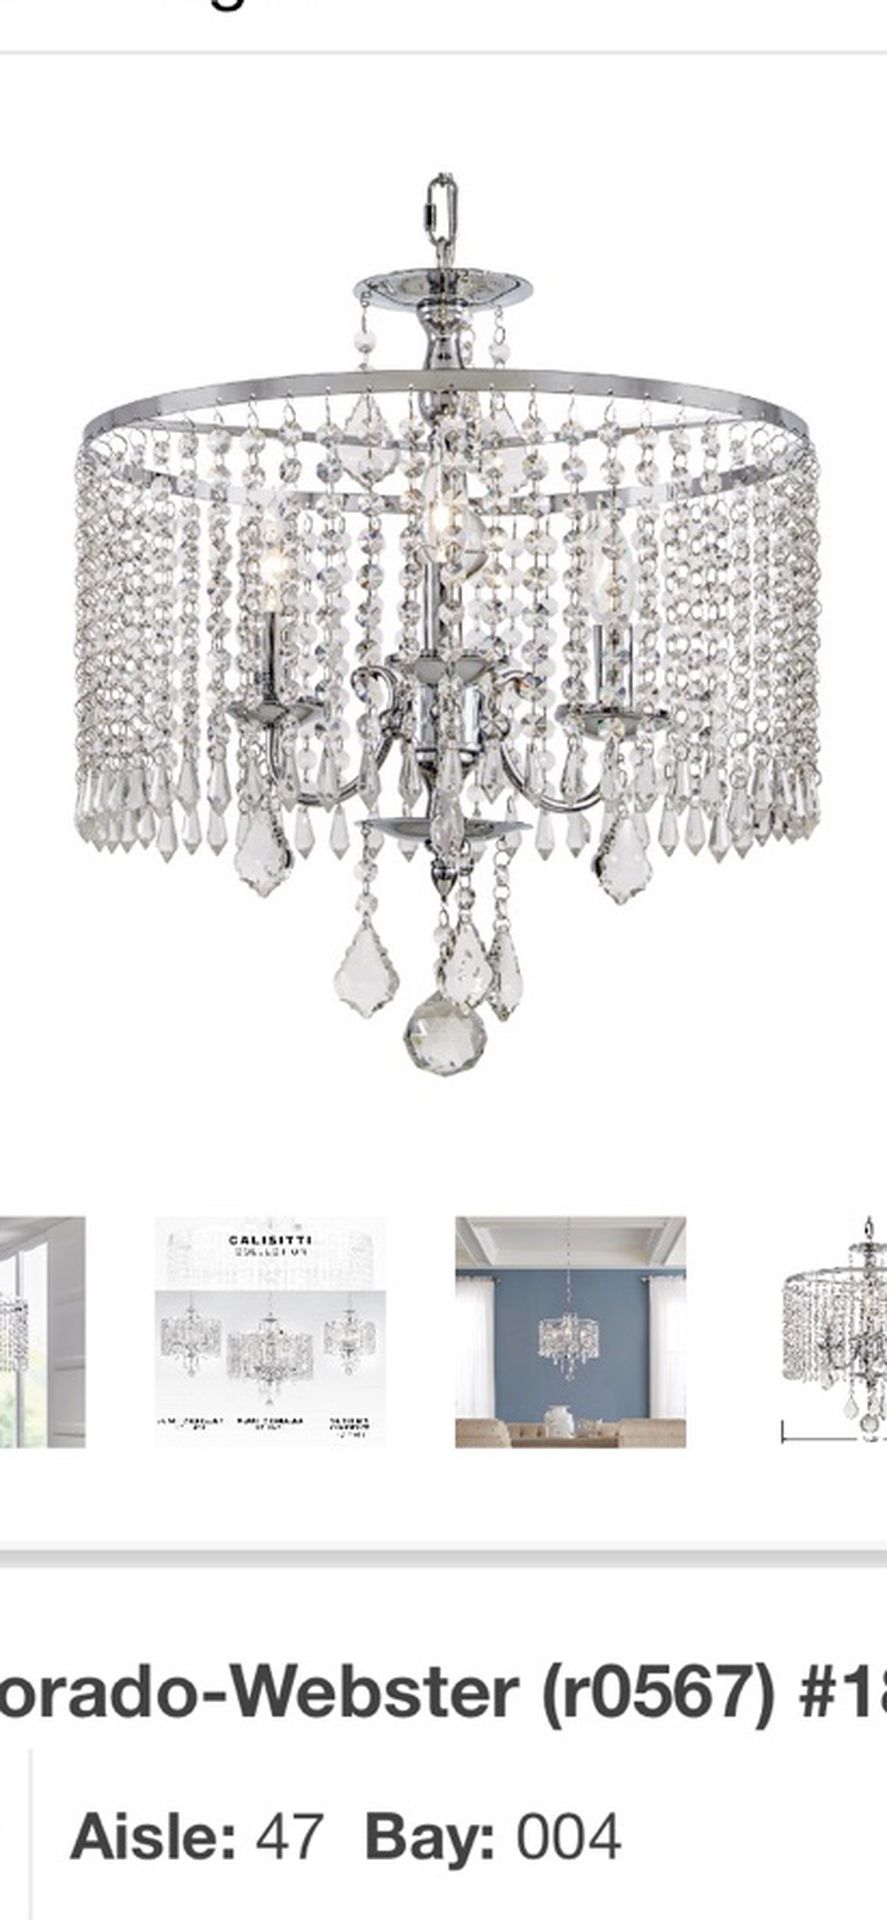 Home Decorators Collection Calisitti 3-Light Polished Chrome Chandelier with K9 Crystal Dangles